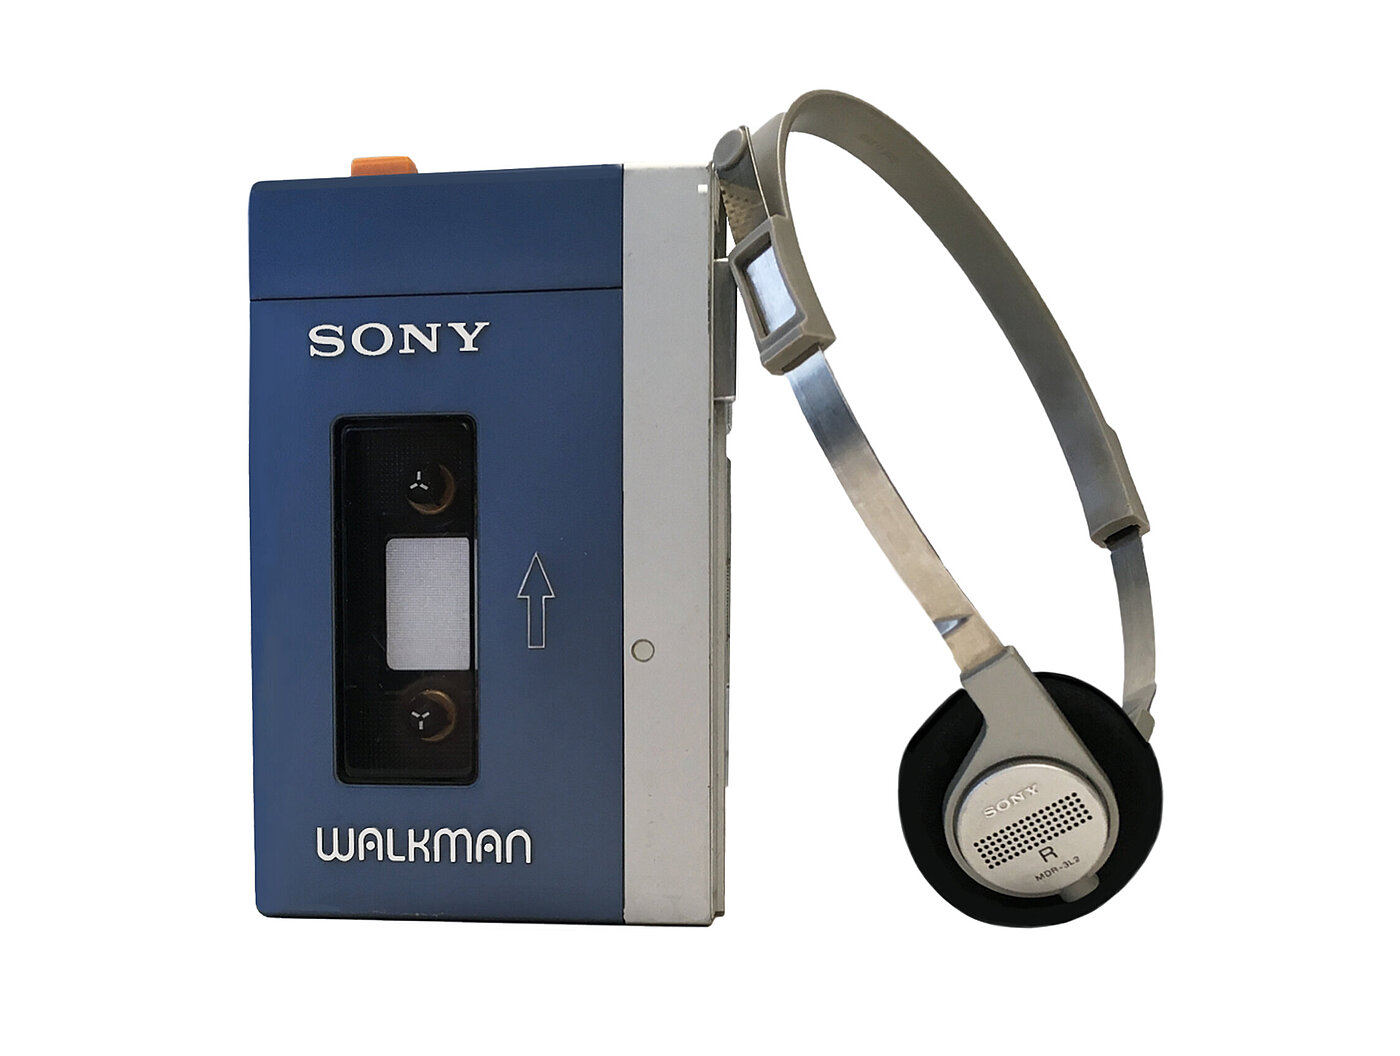 The first walkman from Sony